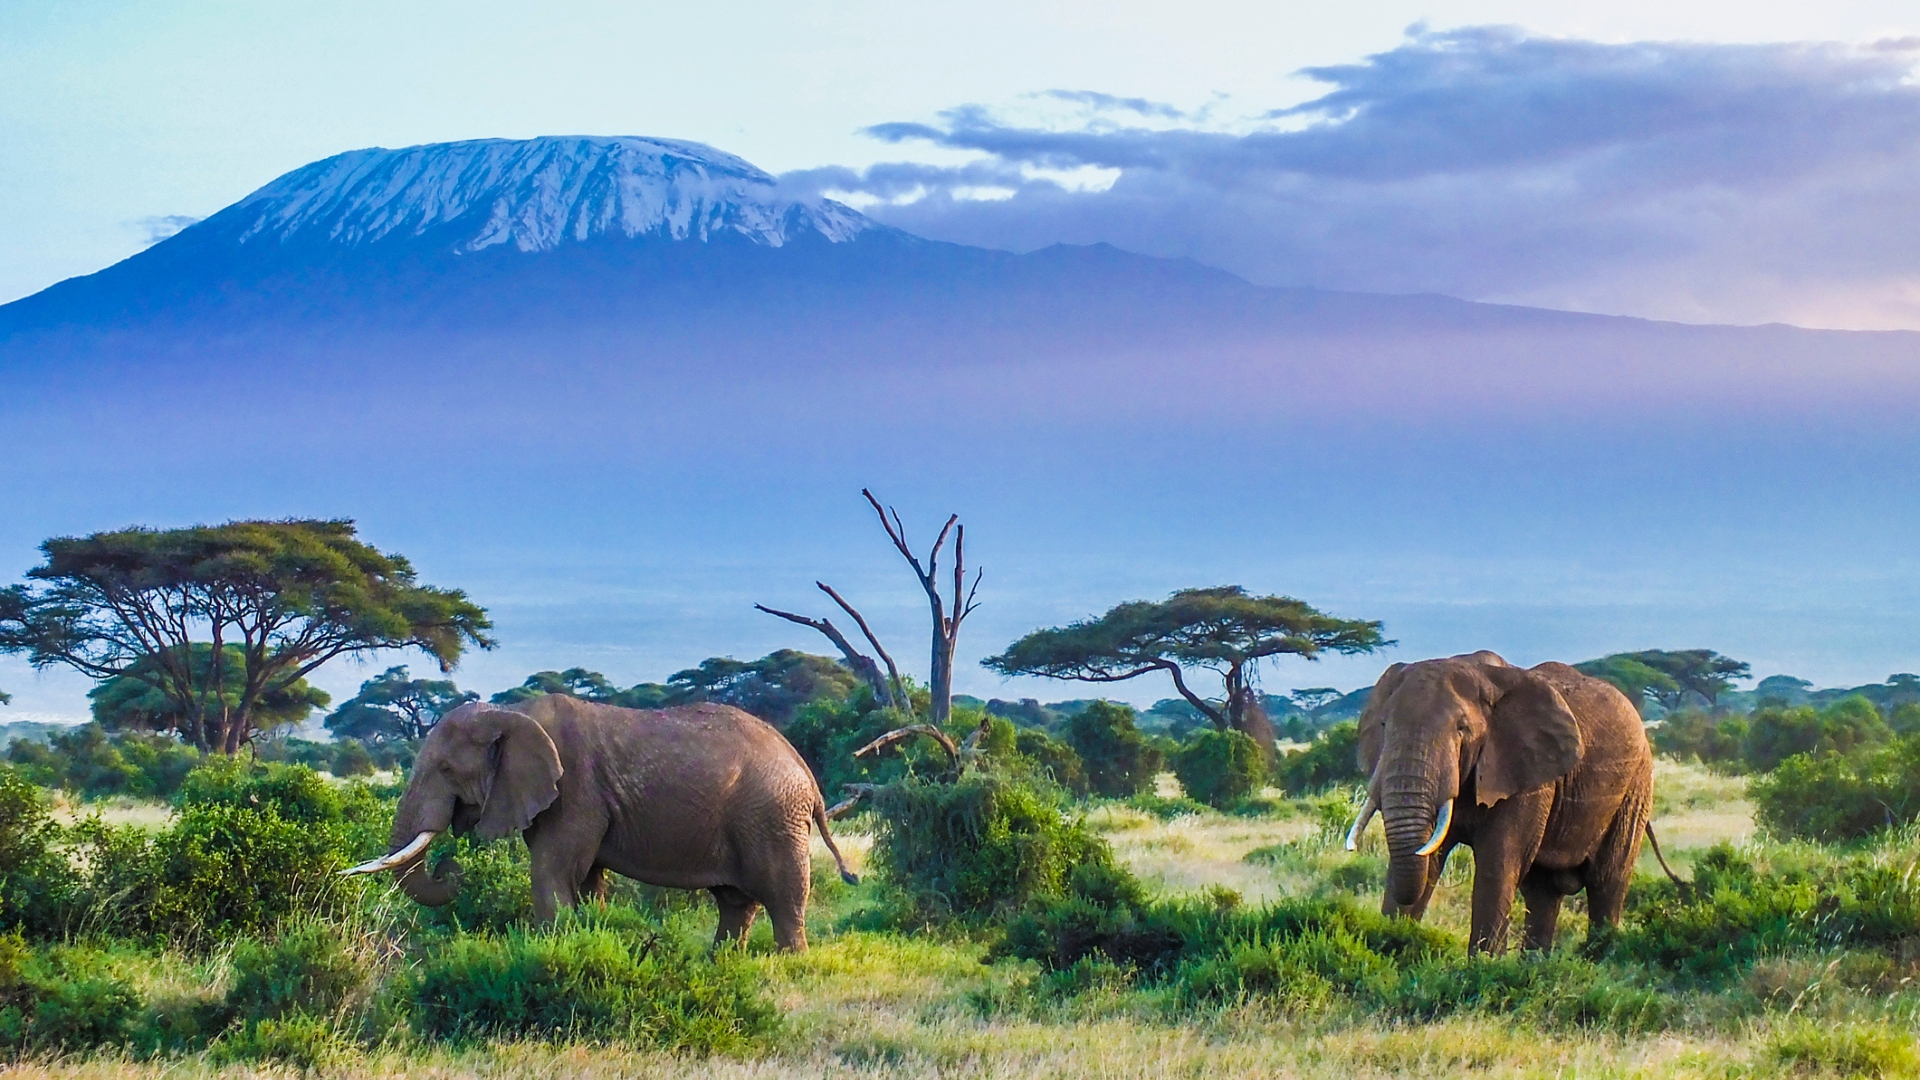 <p>Most safari vacations offer rustic accommodations, and a stay at Angama Amboseli does mean you'll be sleeping in a tent. But you'll also be able to gaze on the majesty of African elephants in the shadows of Mount Kilimanjaro. The resort celebrates the local indigenous community in its architecture and its culinary offerings.</p> <p><strong>For You: <a href="https://www.gobankingrates.com/saving-money/travel/dave-ramsey-vacation-splurges-that-are-waste-of-money/?utm_term=related_link_3&utm_campaign=1264892&utm_source=msn.com&utm_content=4&utm_medium=rss" rel="">Dave Ramsey: 7 Vacation Splurges That are a Waste of Money</a><br>Try This: <a href="https://www.gobankingrates.com/saving-money/travel/expensive-destinations-that-will-be-cheaper-in-2024/?utm_term=related_link_4&utm_campaign=1264892&utm_source=msn.com&utm_content=5&utm_medium=rss" rel="">11 Expensive Vacation Destinations That Will Be Cheaper in 2024</a></strong></p> <p><strong>Sponsored: </strong><a href="https://products.gobankingrates.com/pub/9e562dc4-52f4-11ec-a8c2-0e0b1012e14d?targeting%5Bcompany_product%5D=tra&utm_source=msn.com&utm_campaign=rss&passthru=msn.com" rel="noreferrer noopener nofollow">Owe the IRS $10K or more? Schedule a FREE consultation to see if you qualify for tax relief.</a></p>